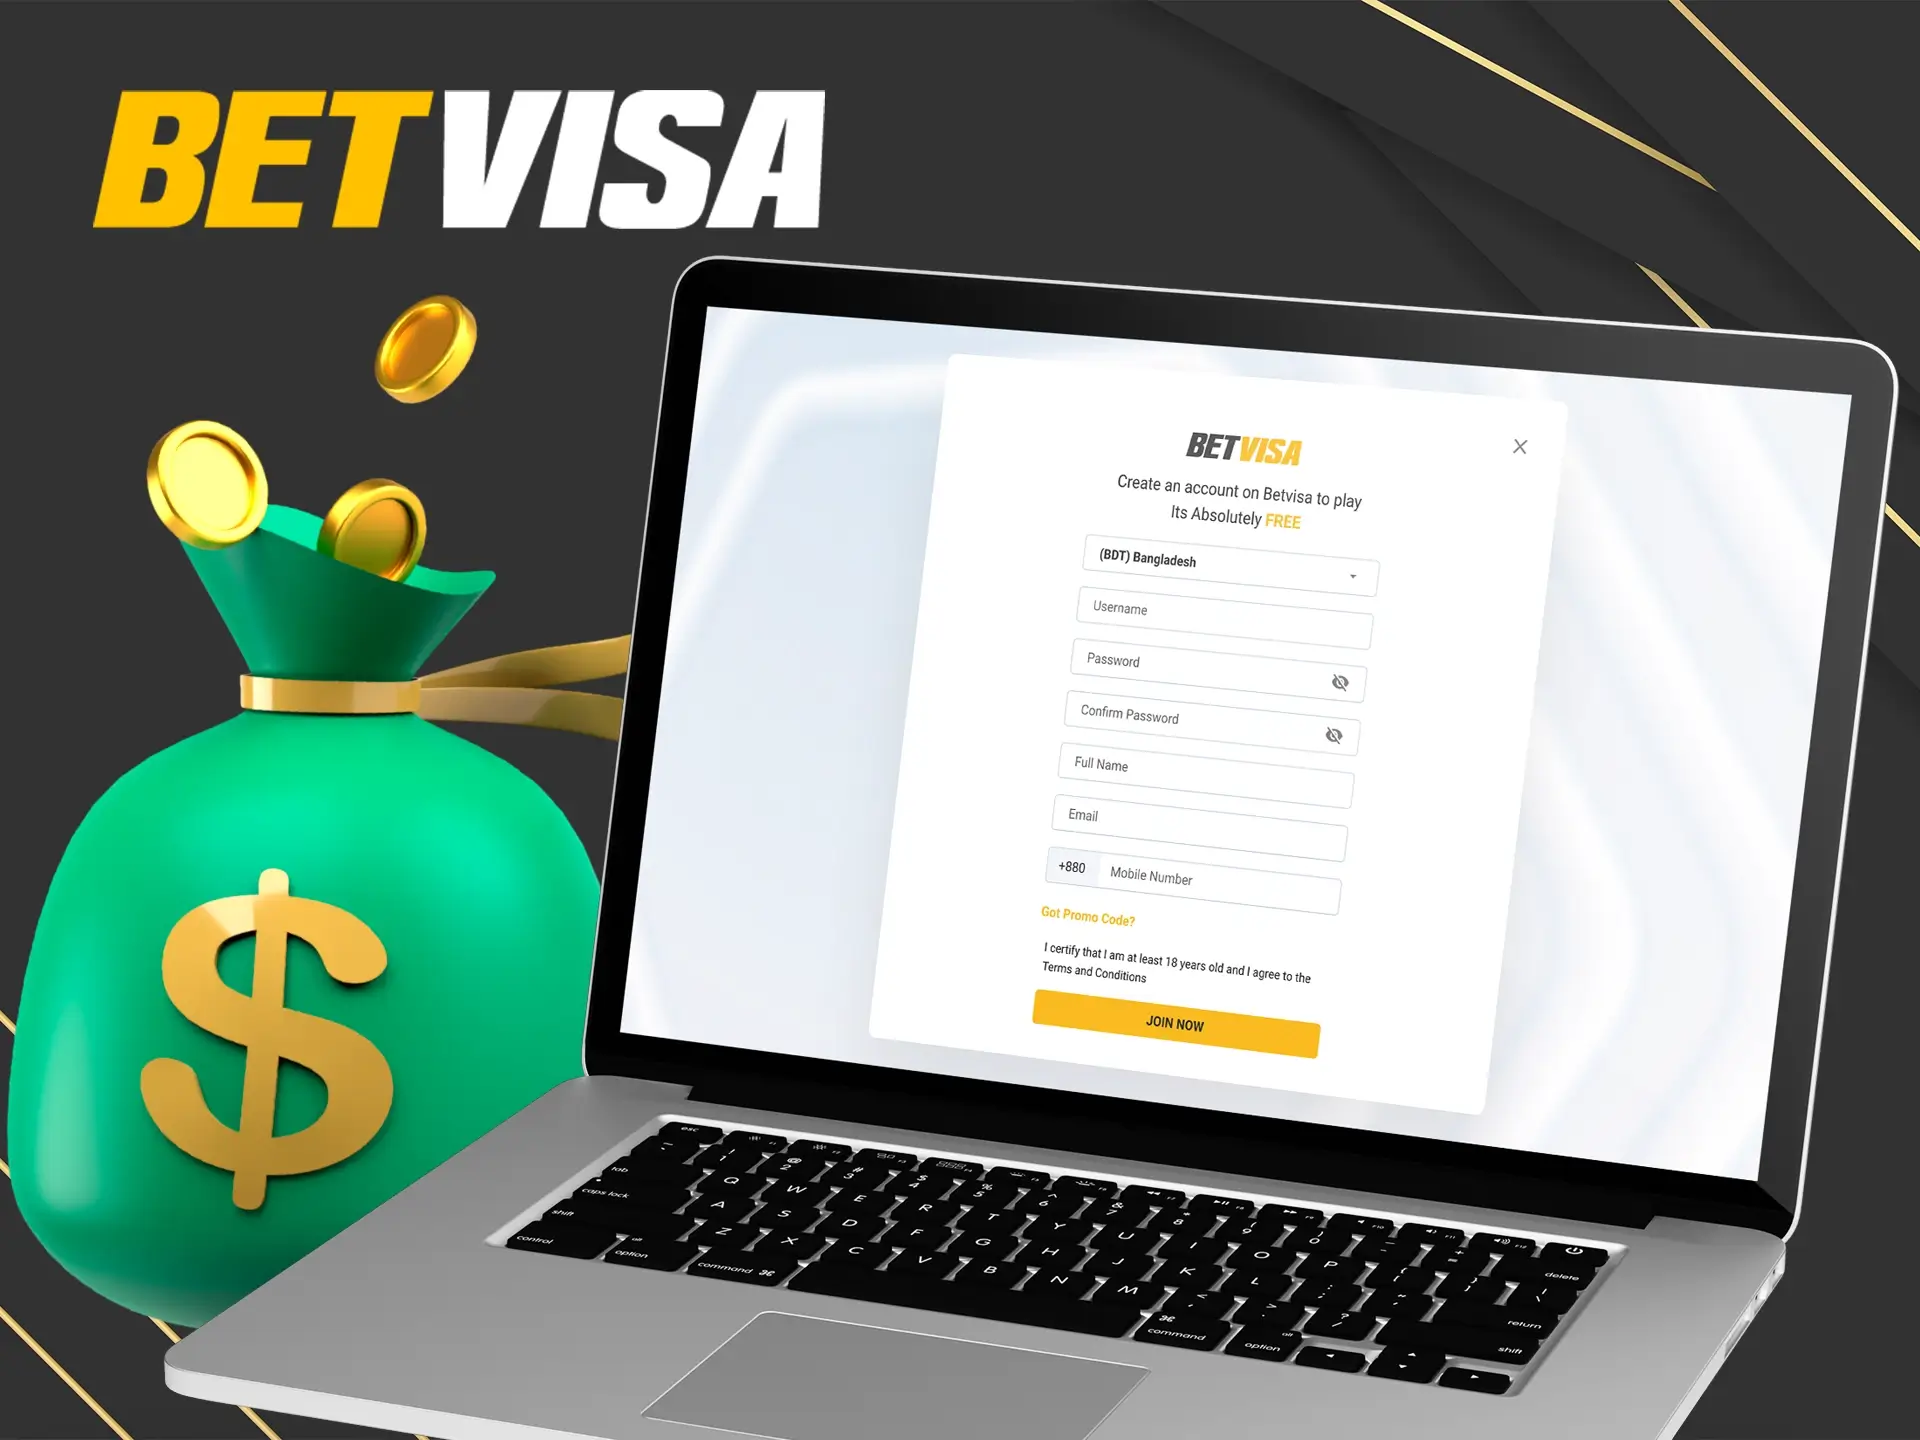 Sign up and get your coveted bonuses and promotions from Betvisa.